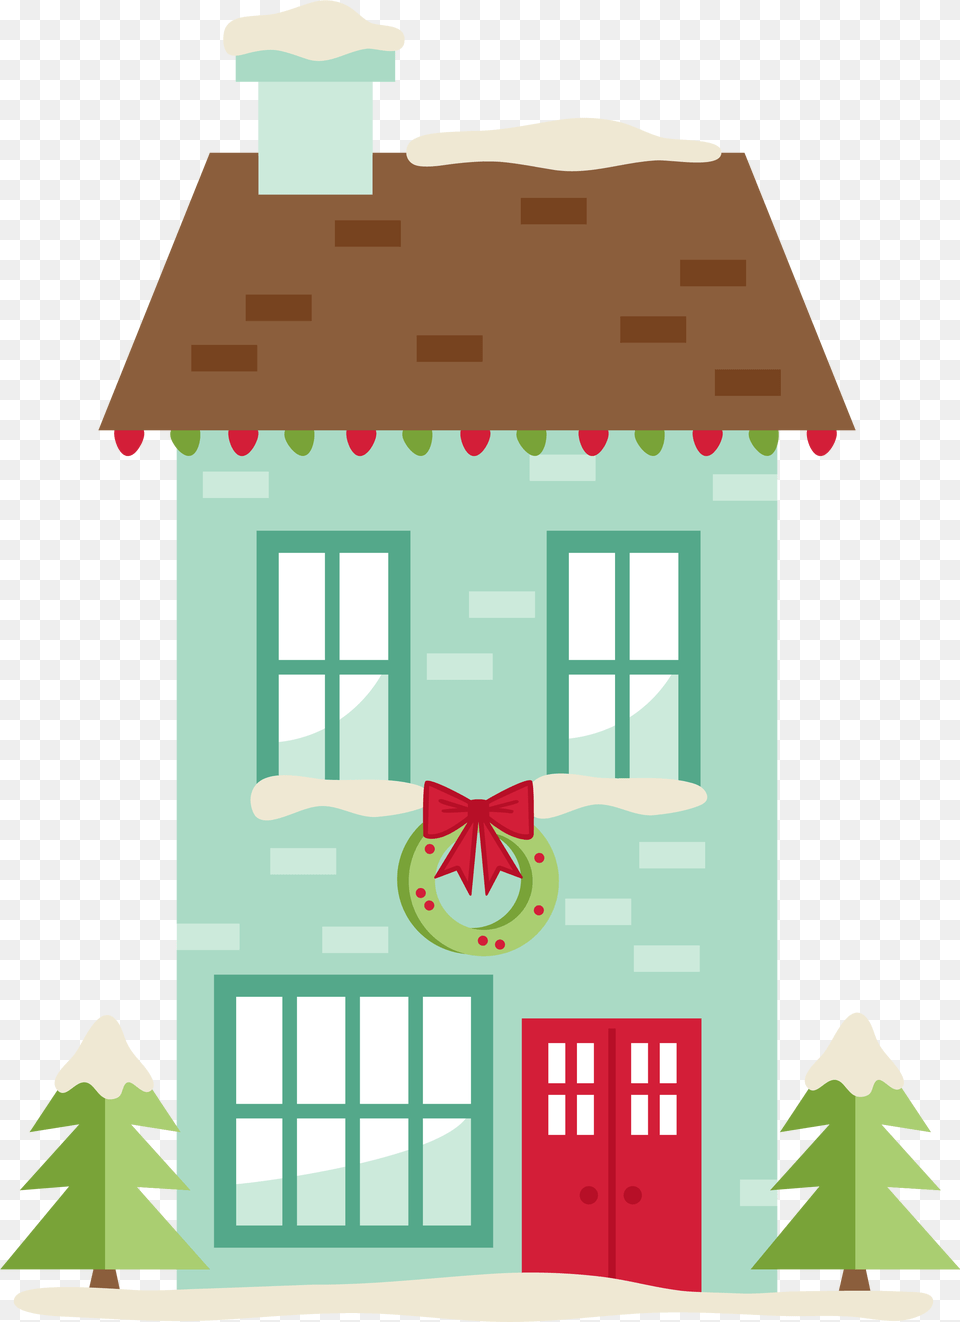 Mkcchristmas House Svg Christmas Silhouette Christmas House, Architecture, Building, Cottage, Neighborhood Free Png